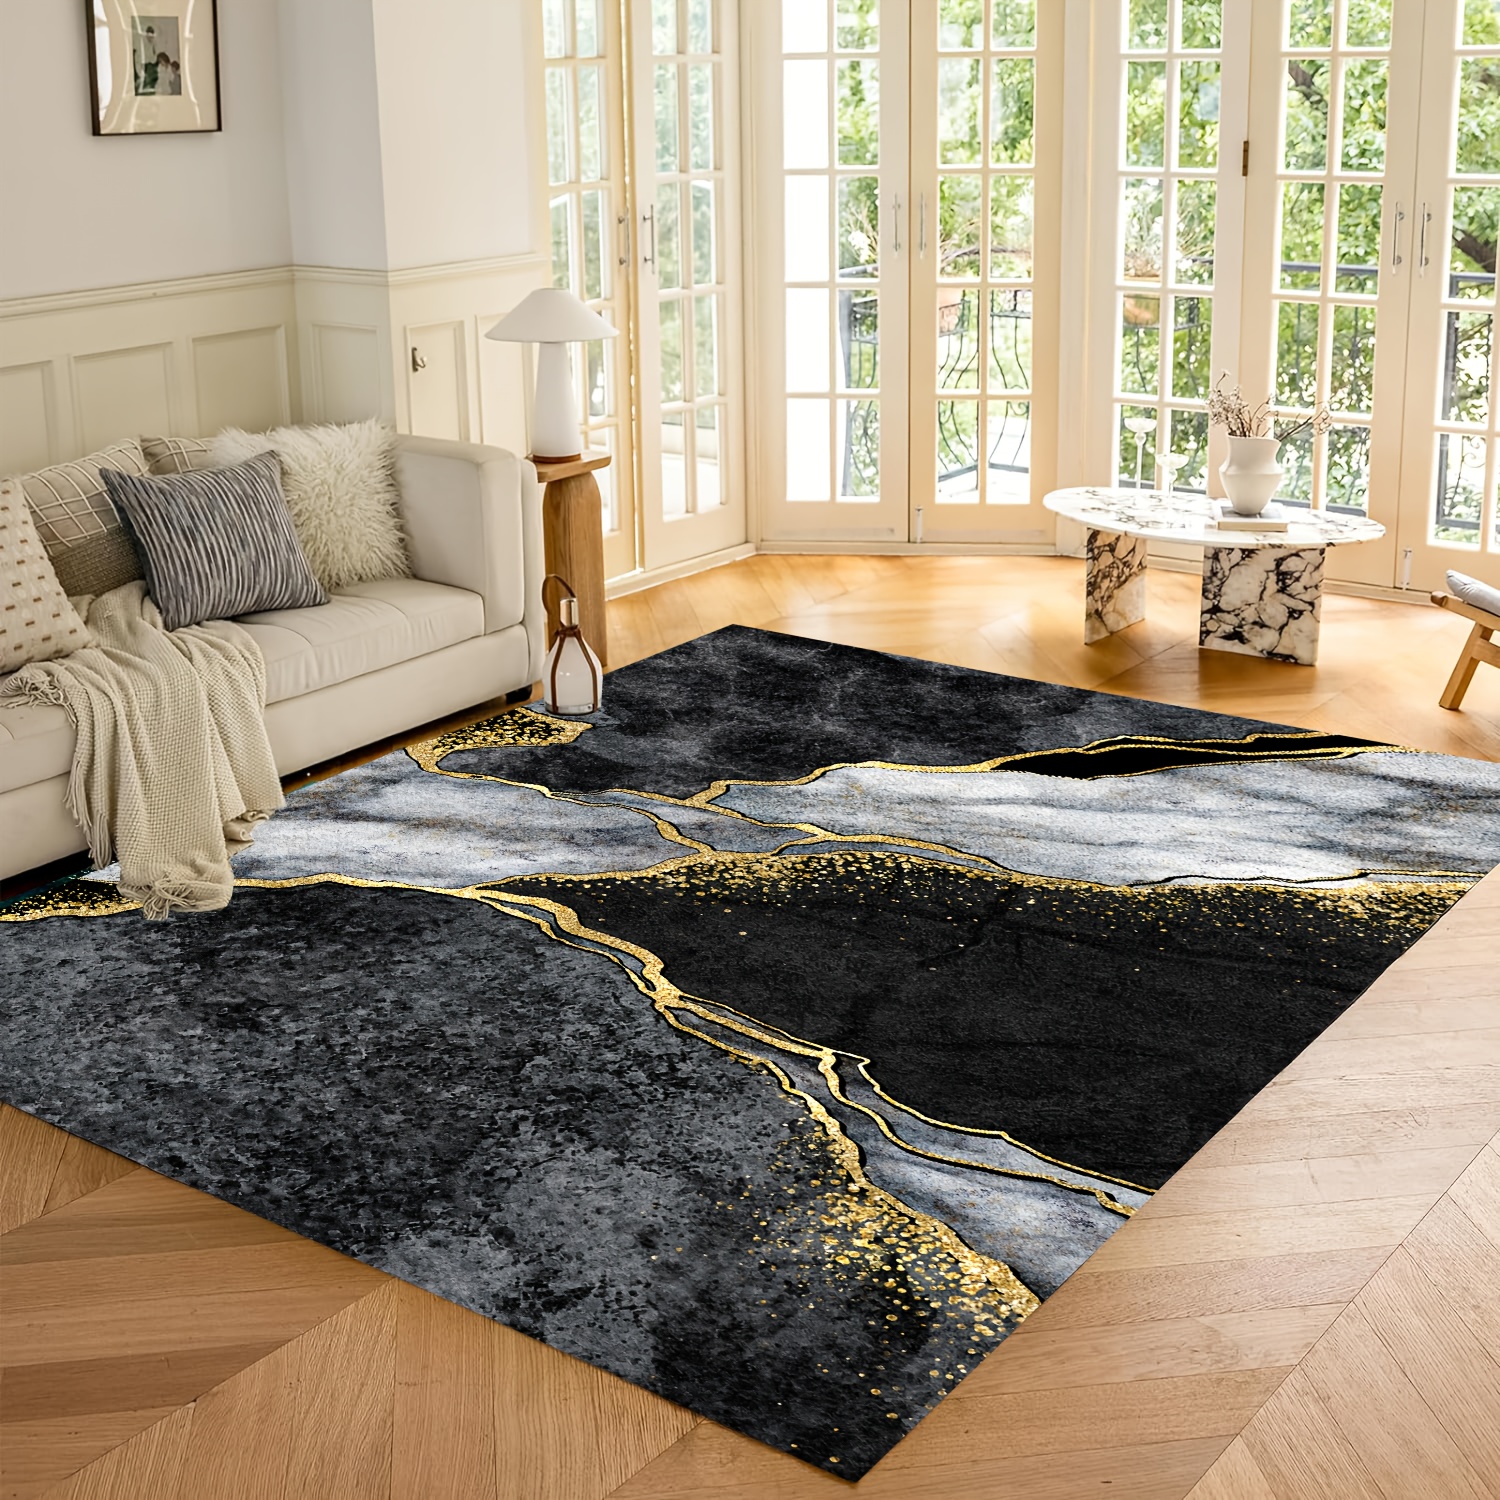 

Luxurious Marble & Line Texture High-density Carpet - 800gsm, Non-slip, Washable Polyester With Decorative Backing For Living Room, Bedroom, Dining, And More